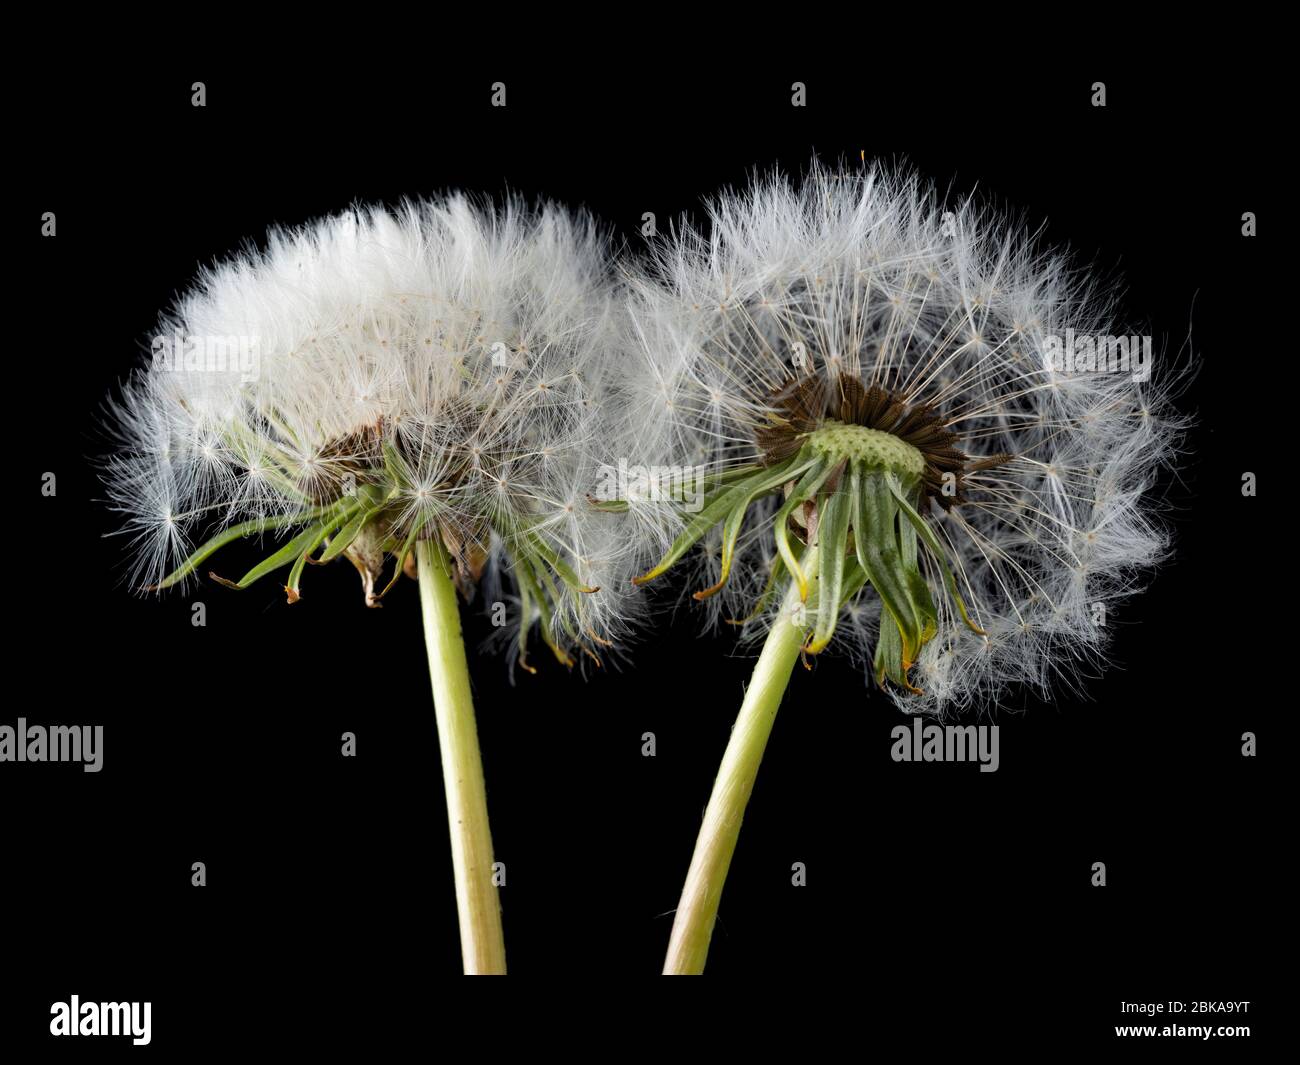 Backlit 'clock' seedheads of dandelion, Taraxacum officinalis, a UK garden weed and wildflower on a black background Stock Photo